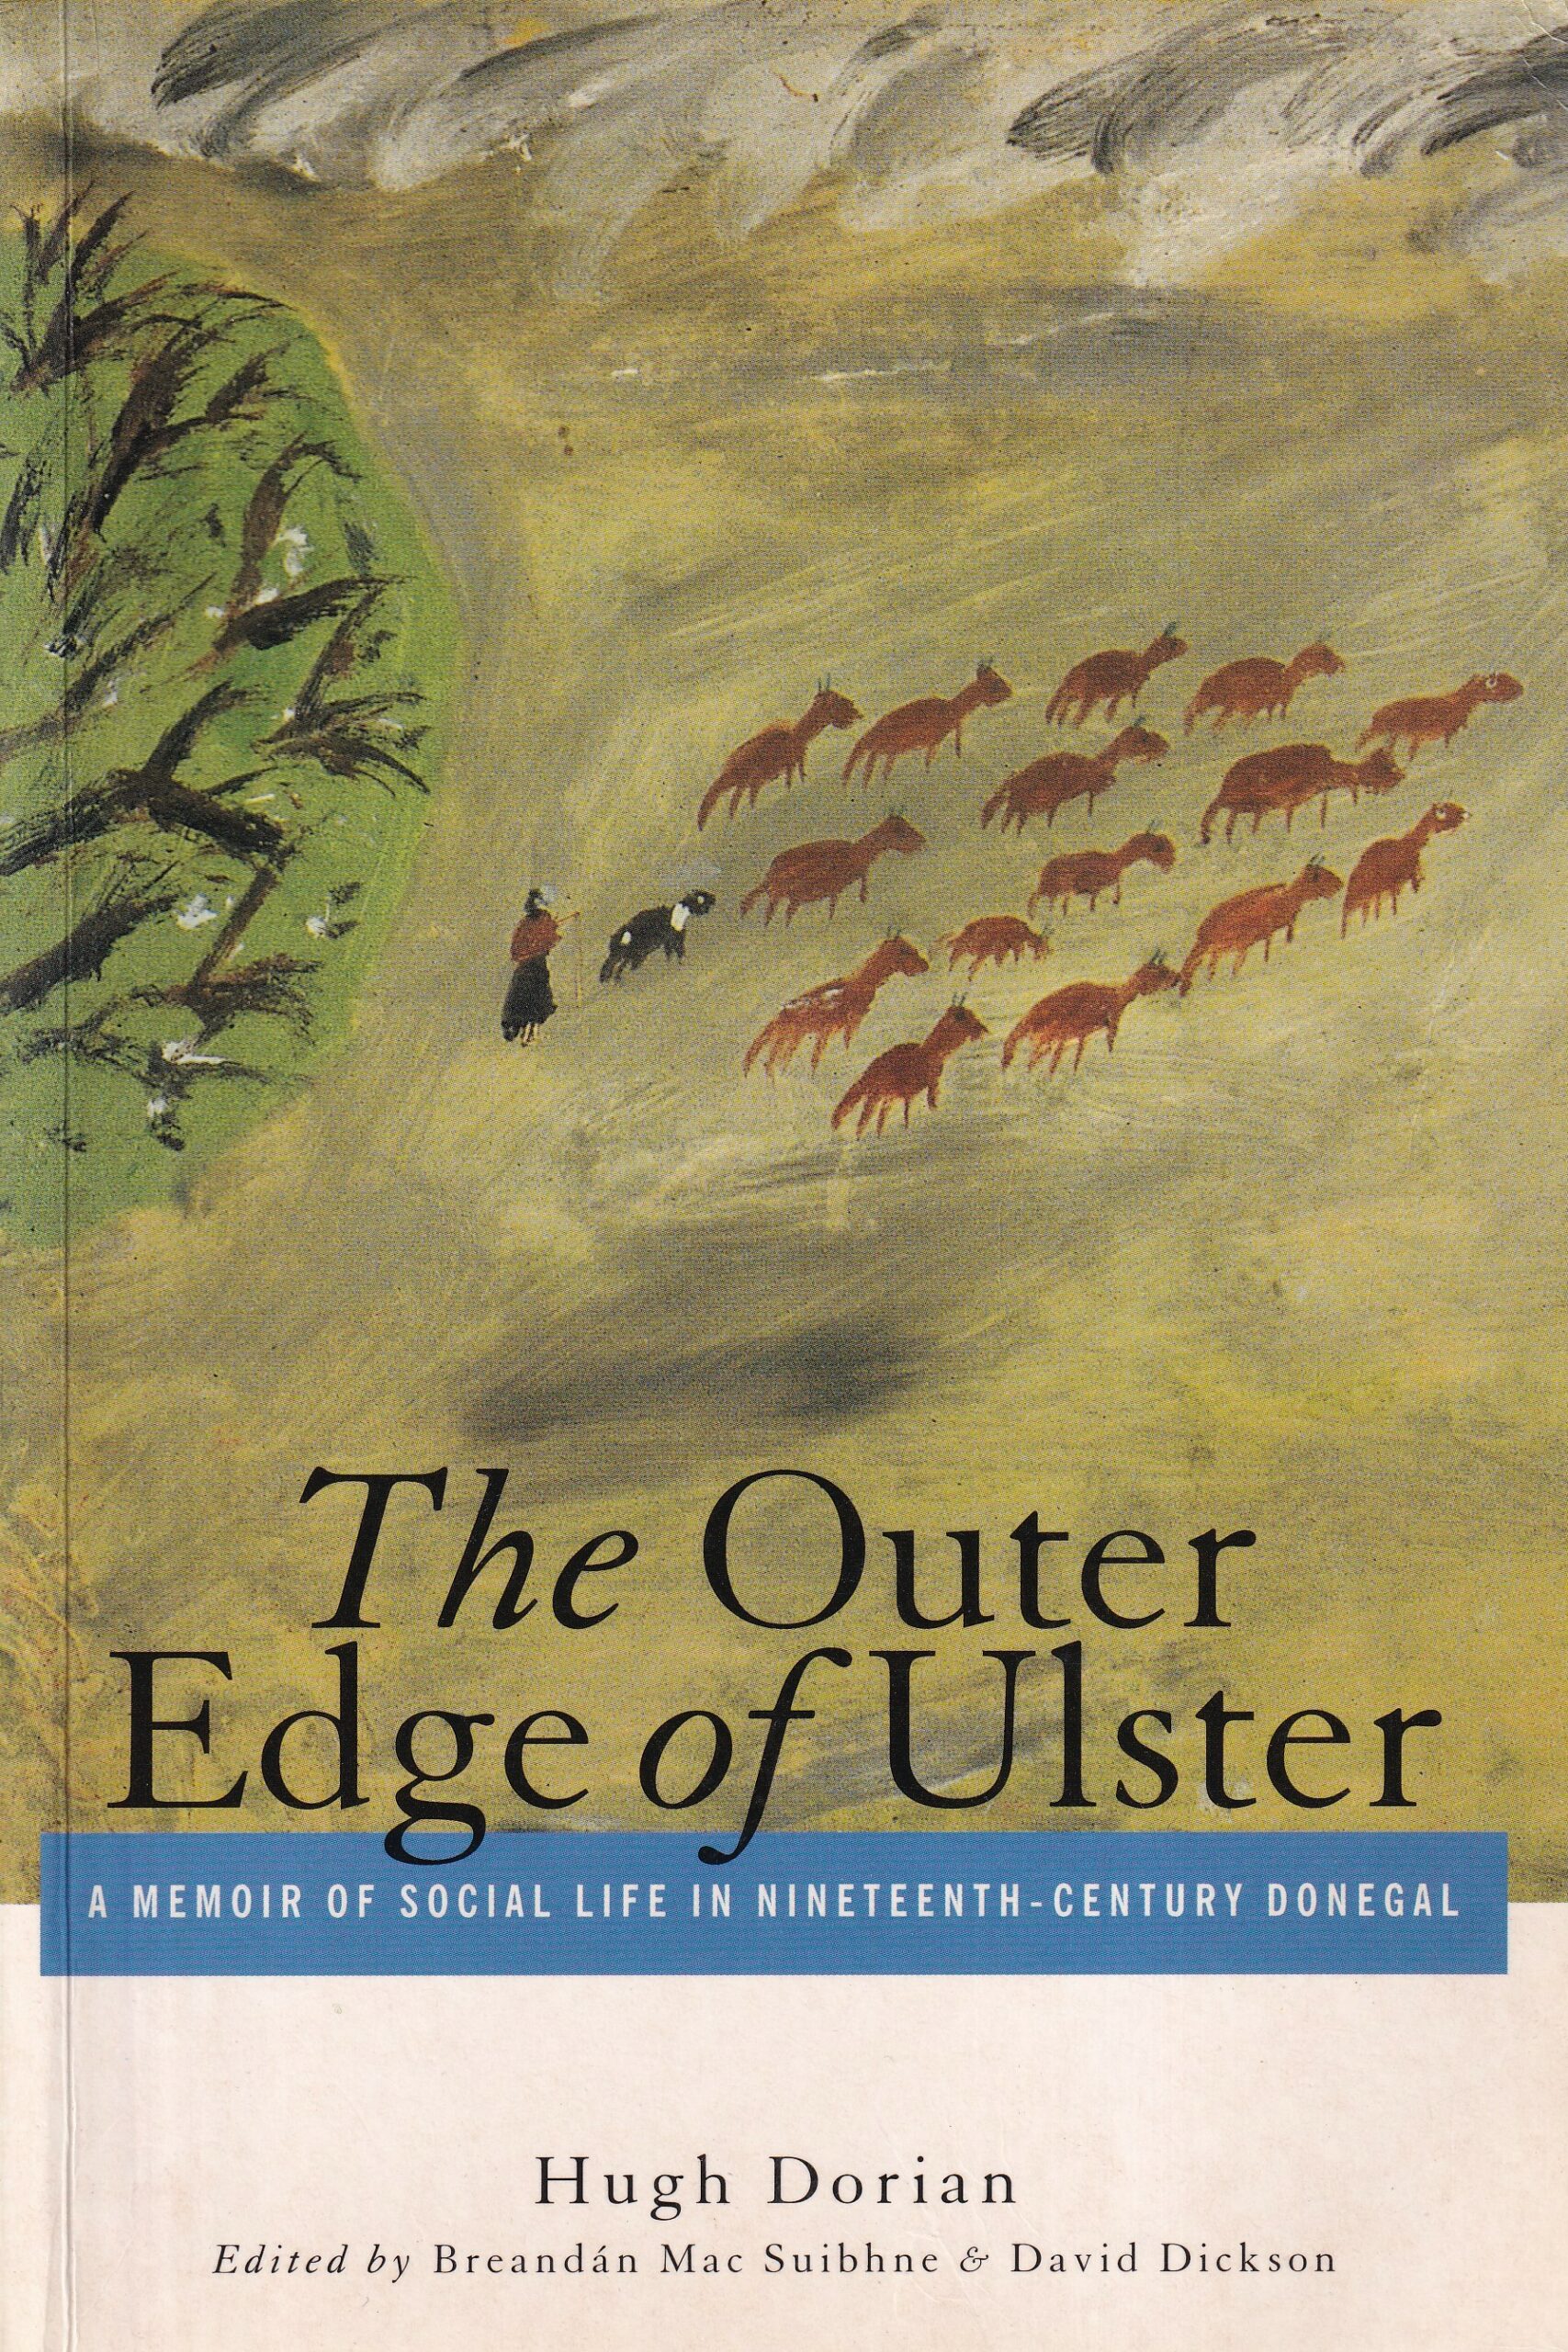 The Outer Edge of Ulster: A Memoir of Social Life in Nineteenth-Century Donegal | Hugh Dorian | Charlie Byrne's